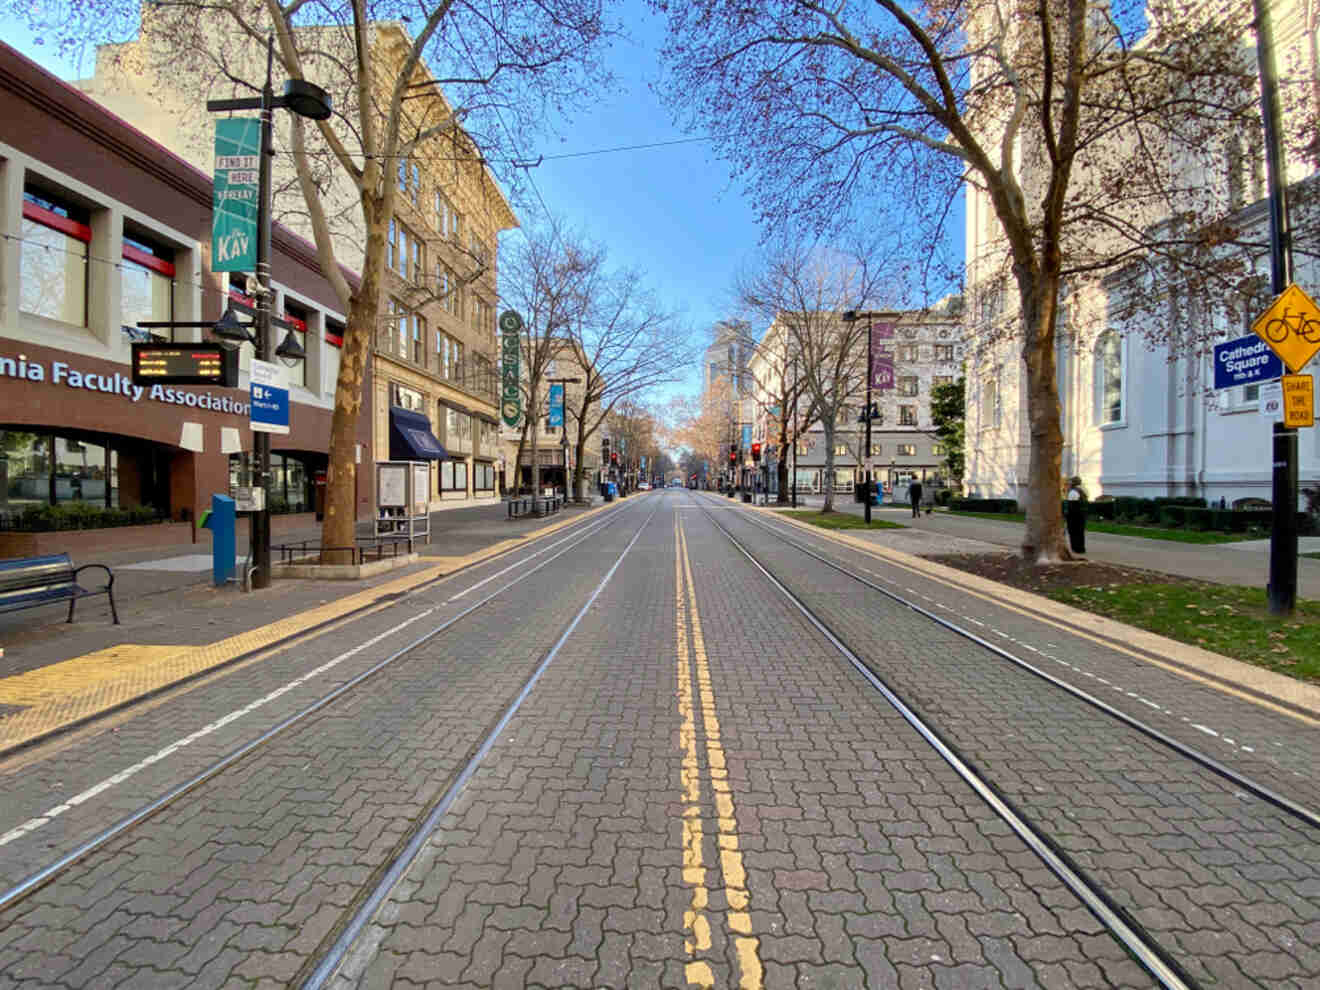 a quiet, tree-lined city street in Midtown Sacramento with tram tracks running down the center. Storefronts and historical buildings flank one side, while a clear blue sky adds to the serene urban landscape